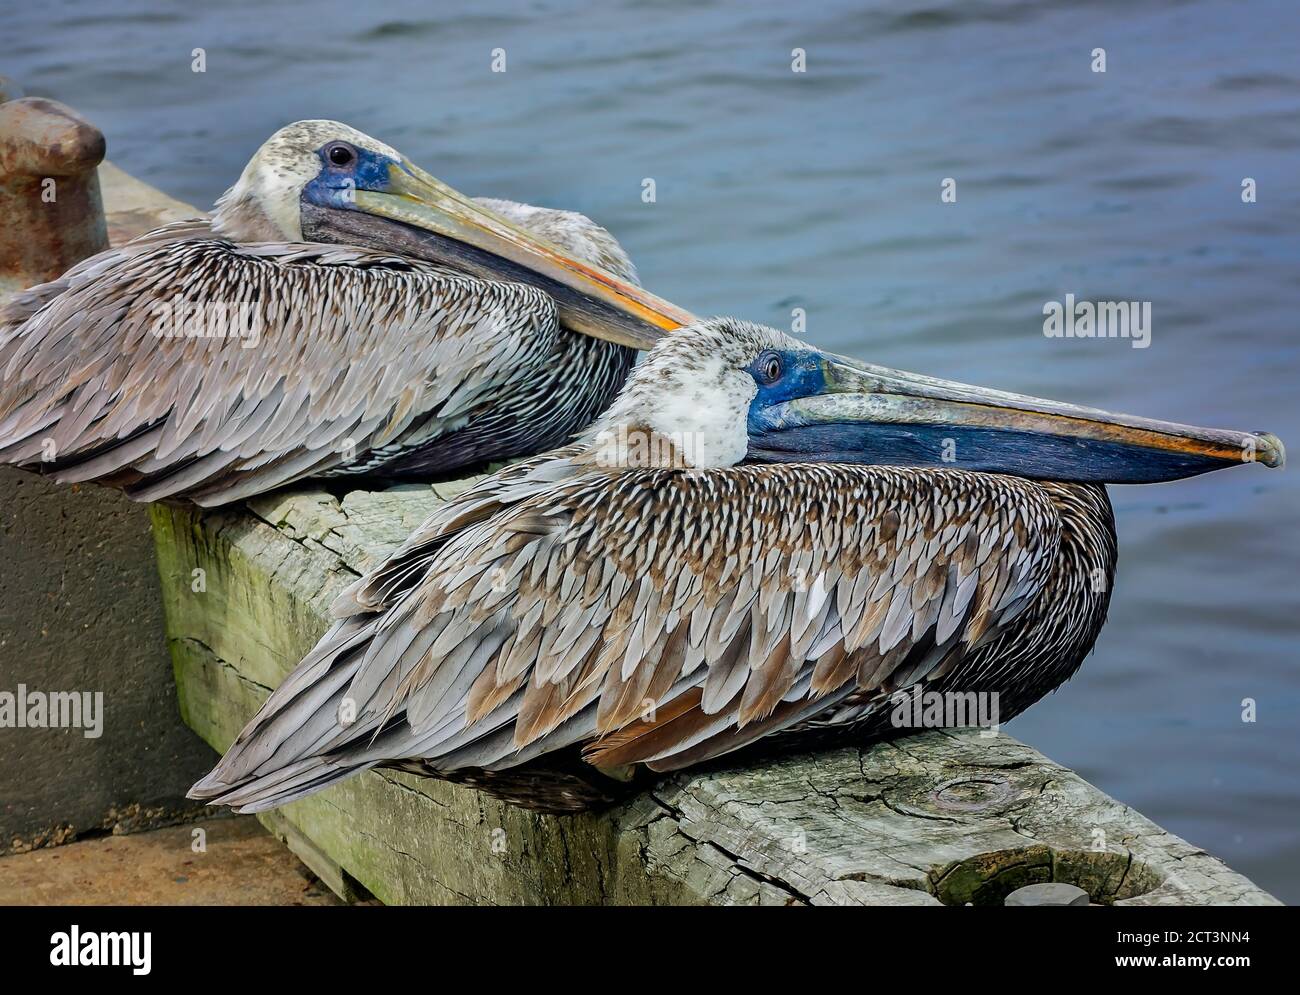 Senior brown pelican mates perch on a pier together at Palafox Pier, Sept. 18, 2020, in Pensacola, Florida. Pelicans live an average of 15-25 years. Stock Photo